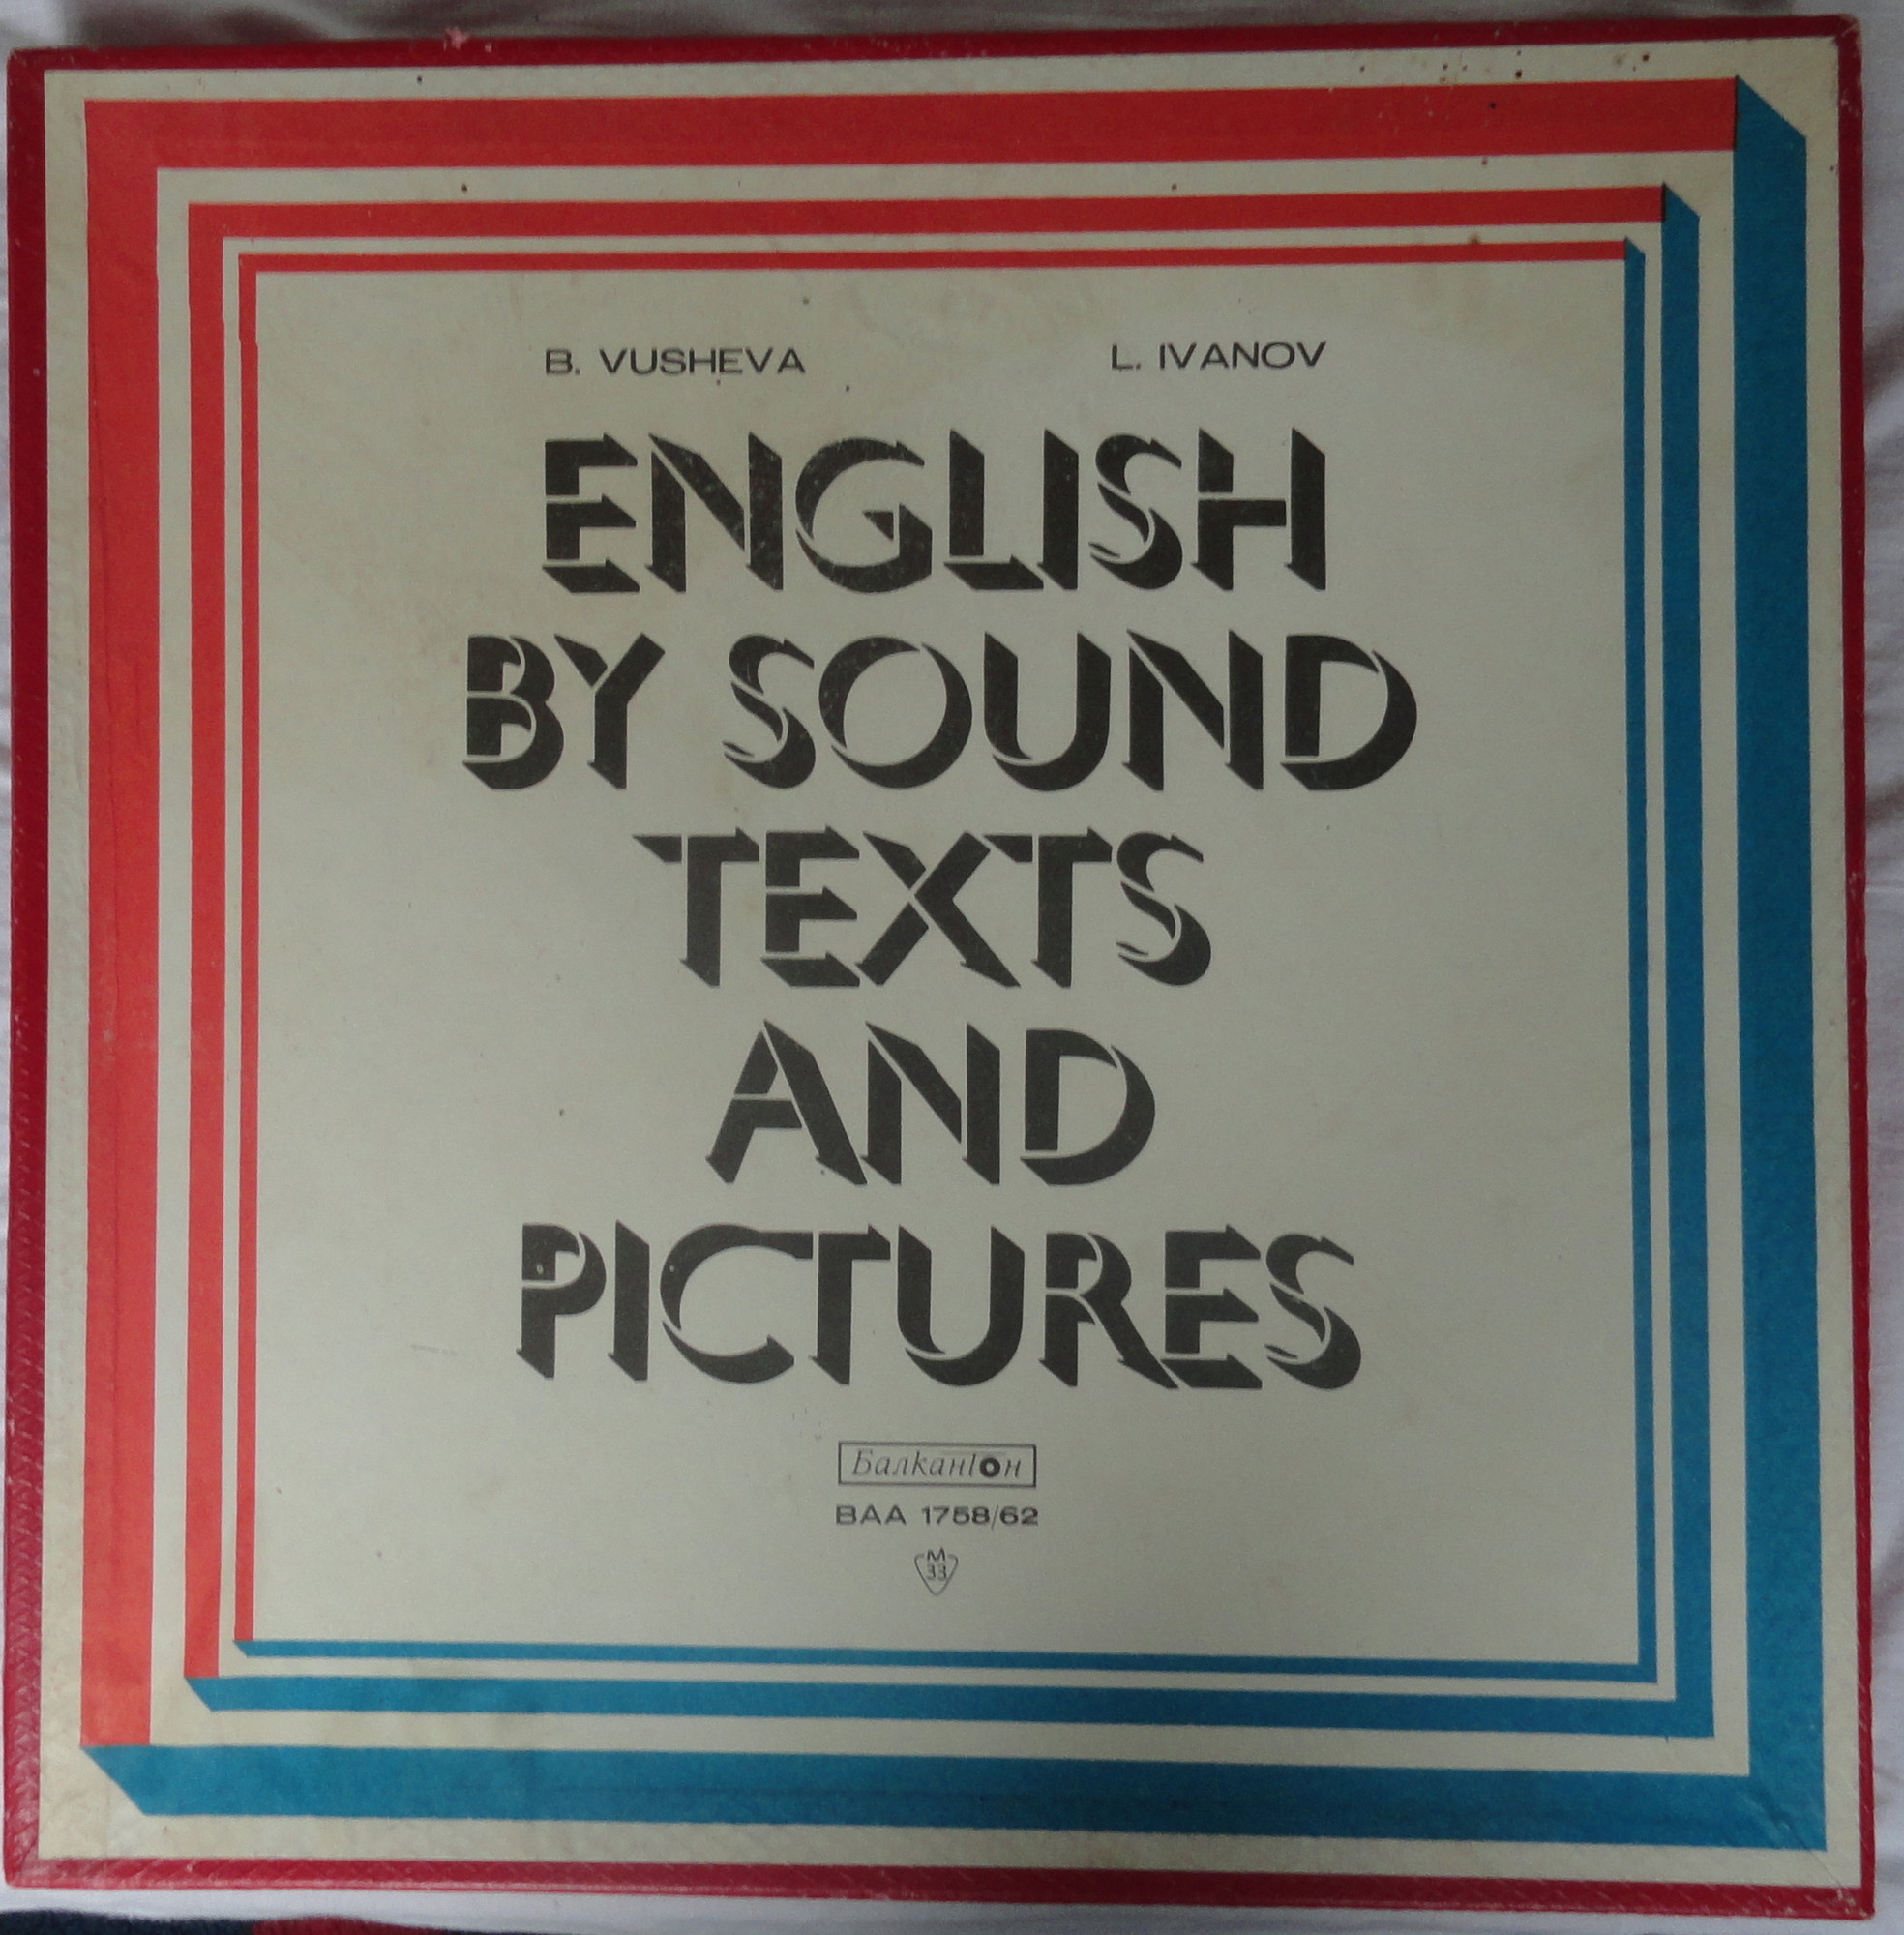 B. Vusheva, L. Ivanov. English by sound texts and pictures